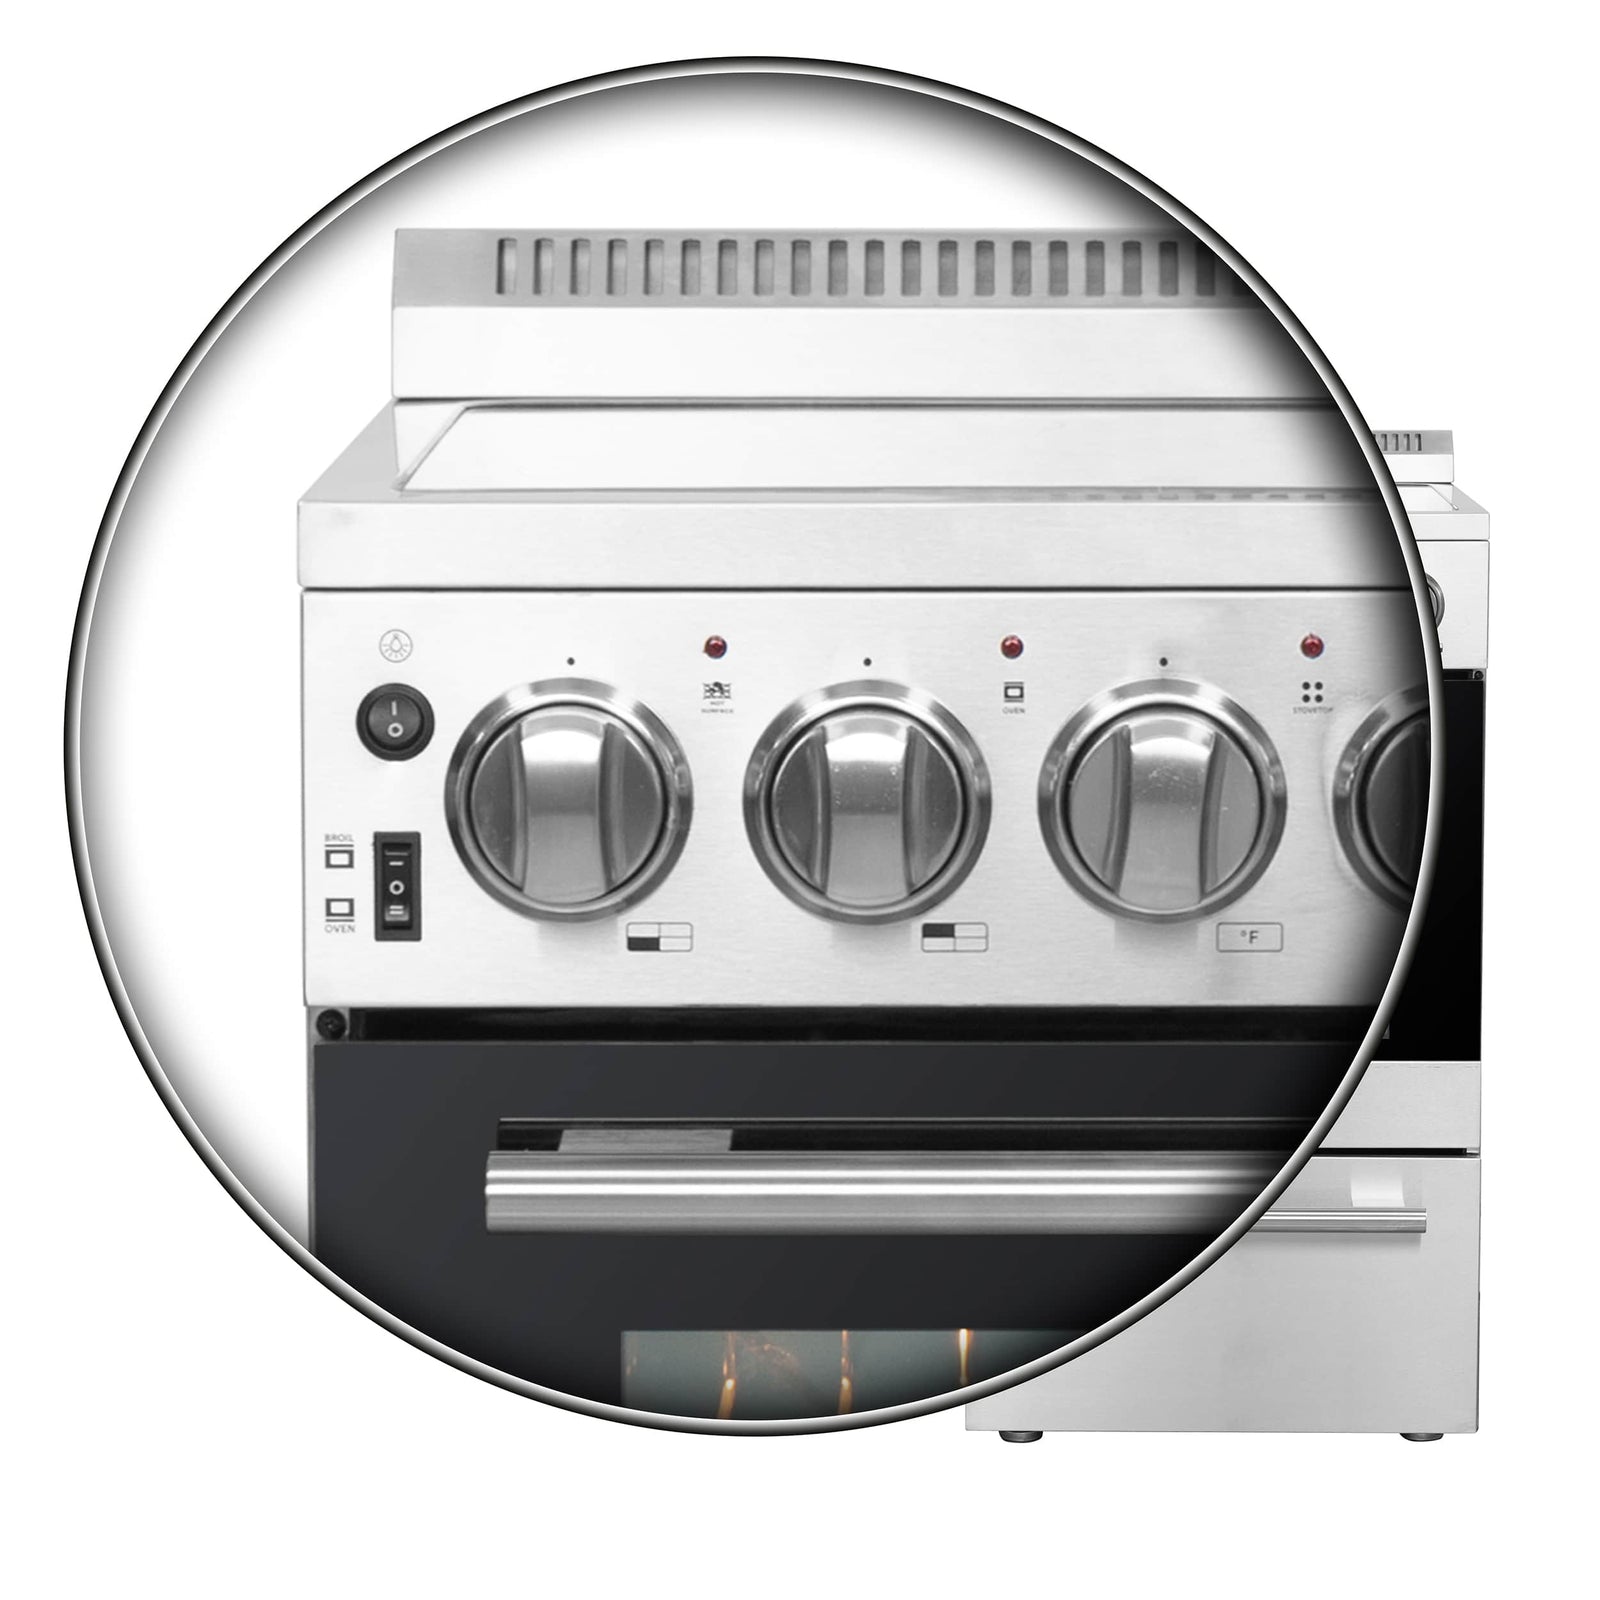 FORNO - 20-Inch Pallerano Electric Range with 4 Burners in Stainless Steel